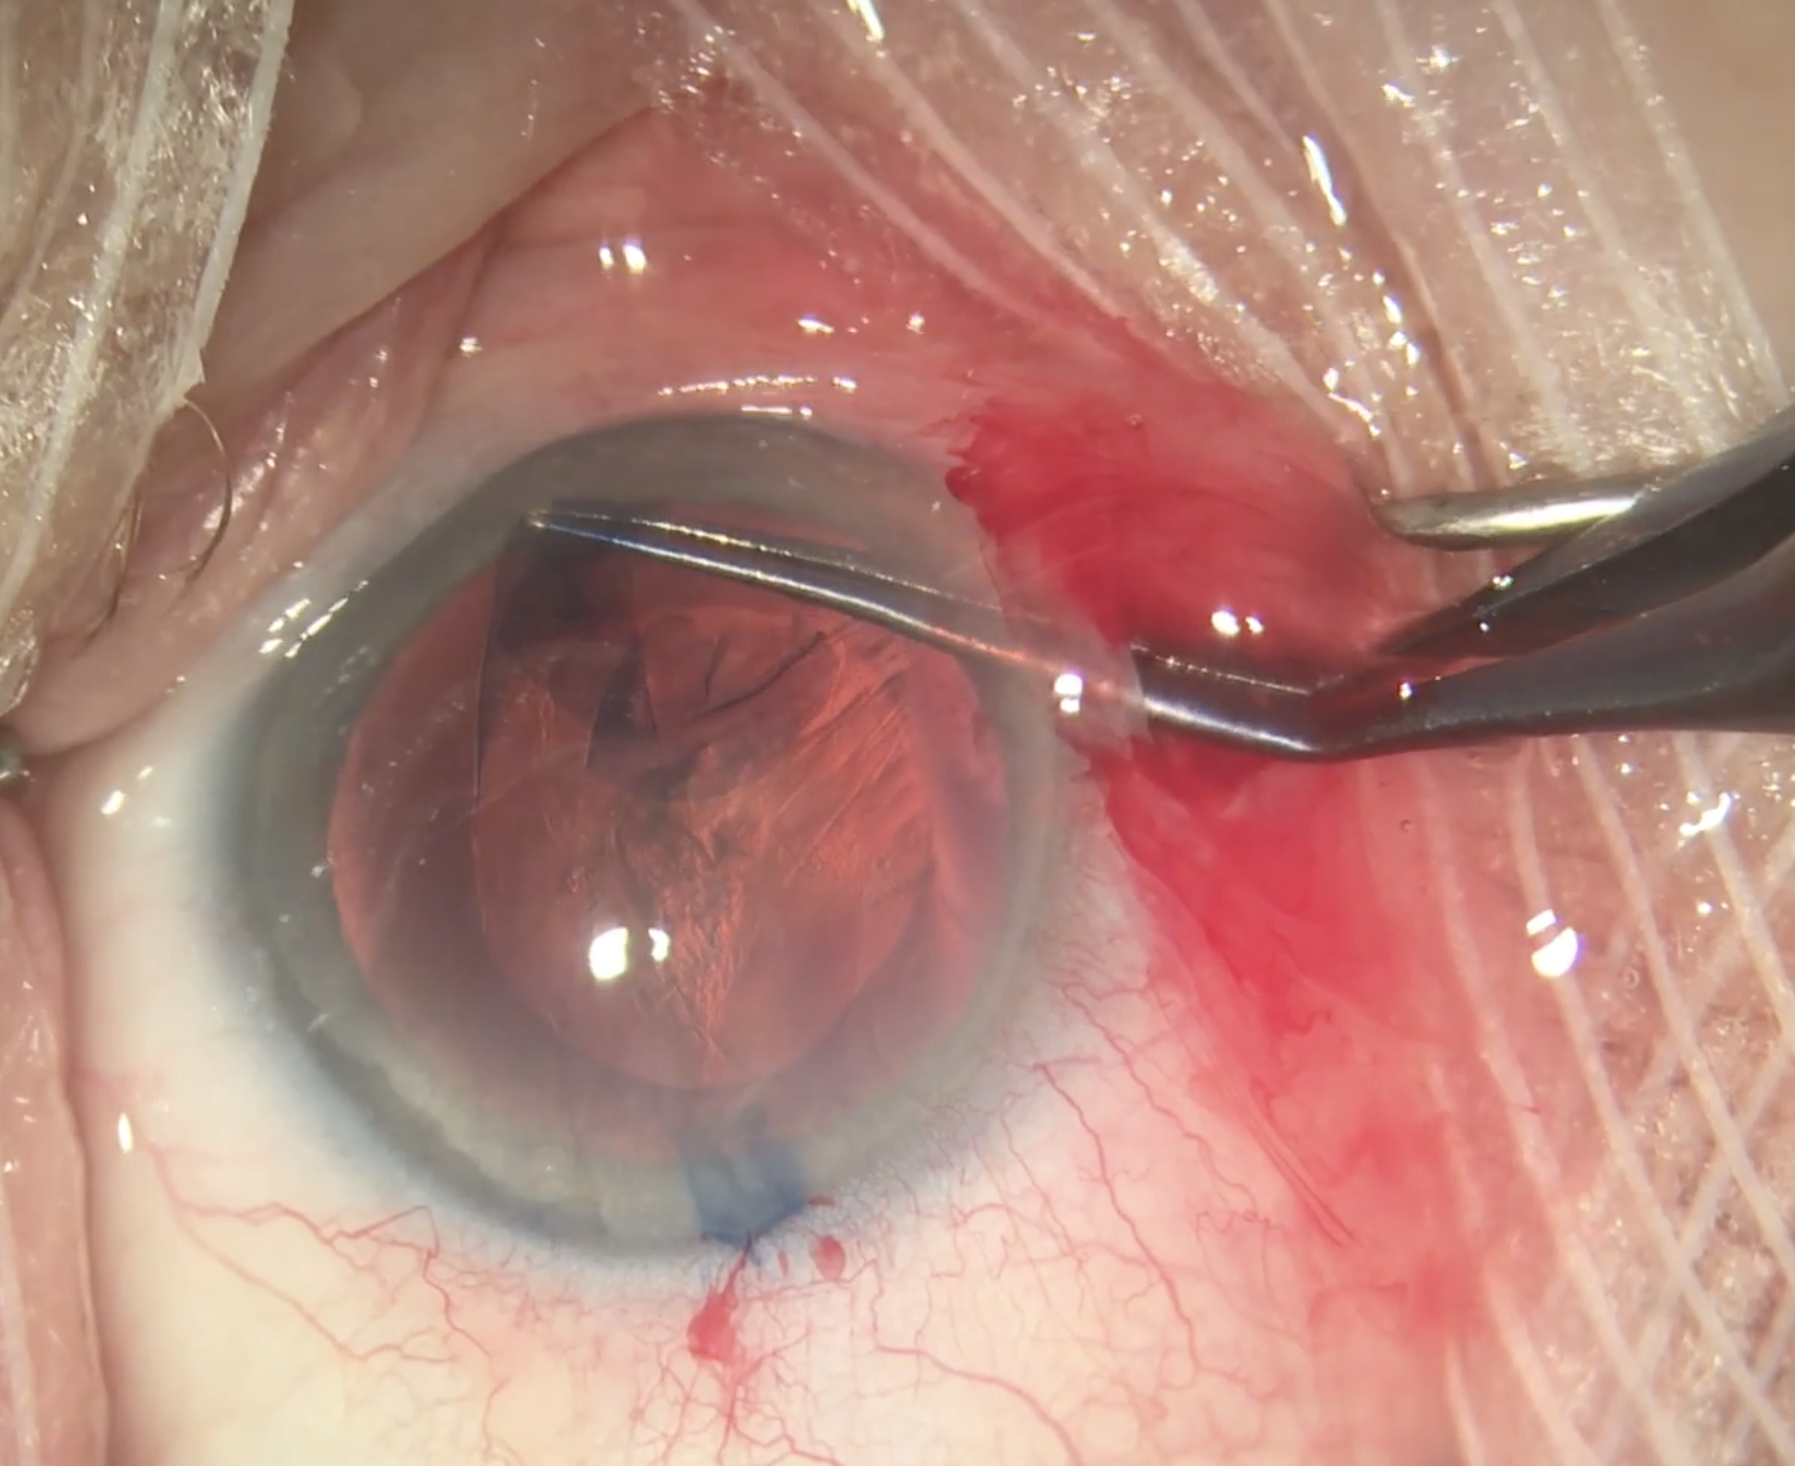 An analysis of Medicare claims found a decrease in bilateral cataract surgeries between 2011-2019 compared with the decade before.